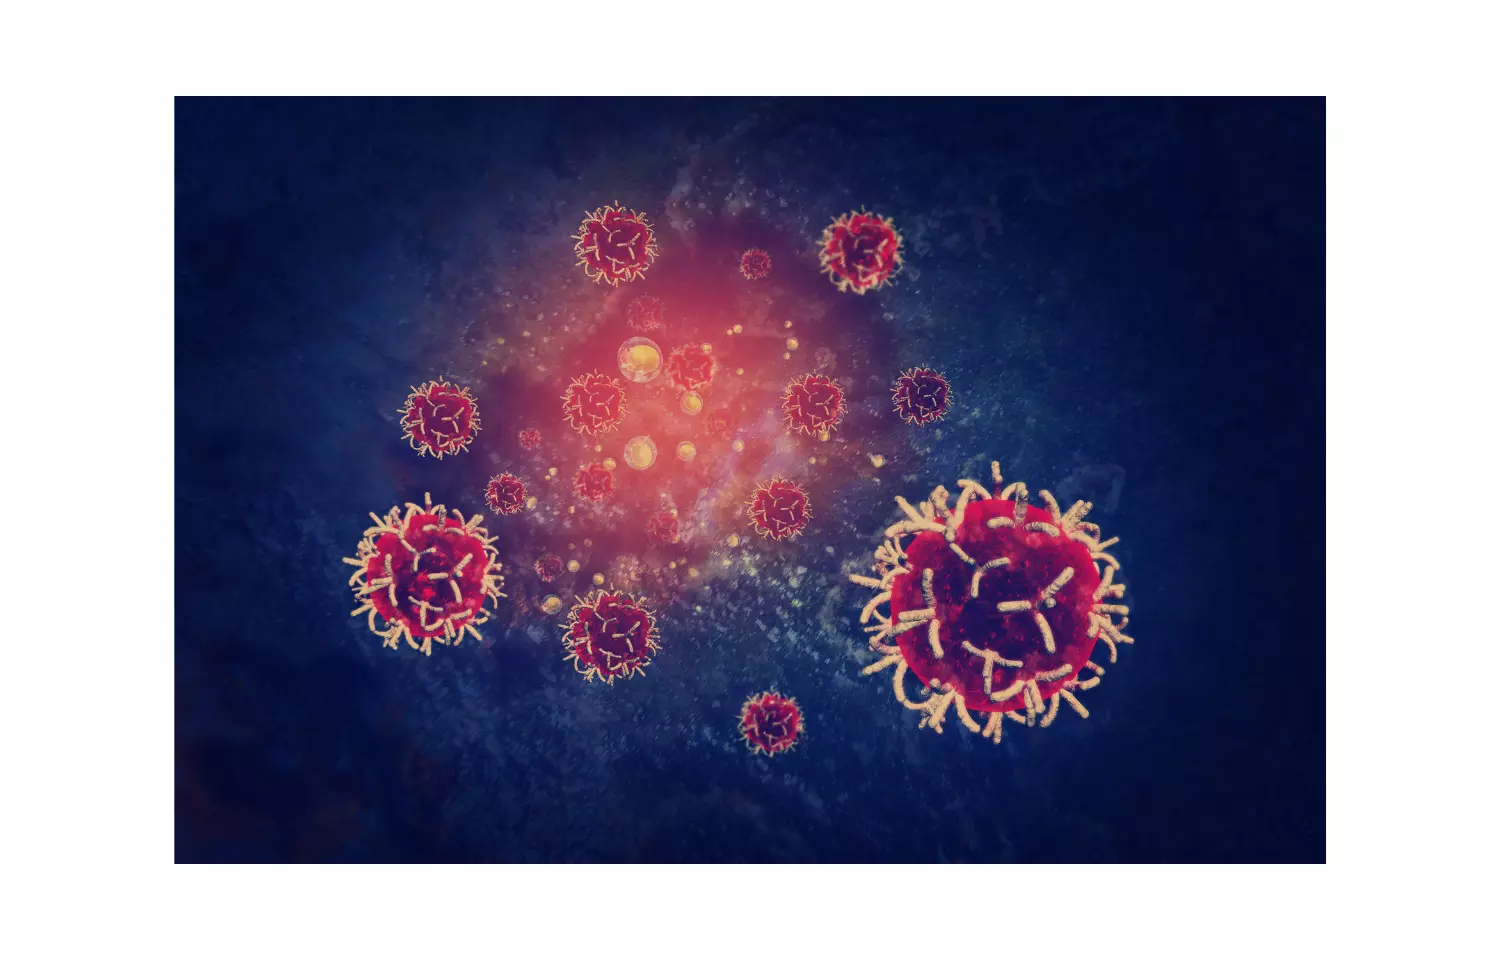 Patients of Myeloproliferative neoplasms are at high risk of infection: Study